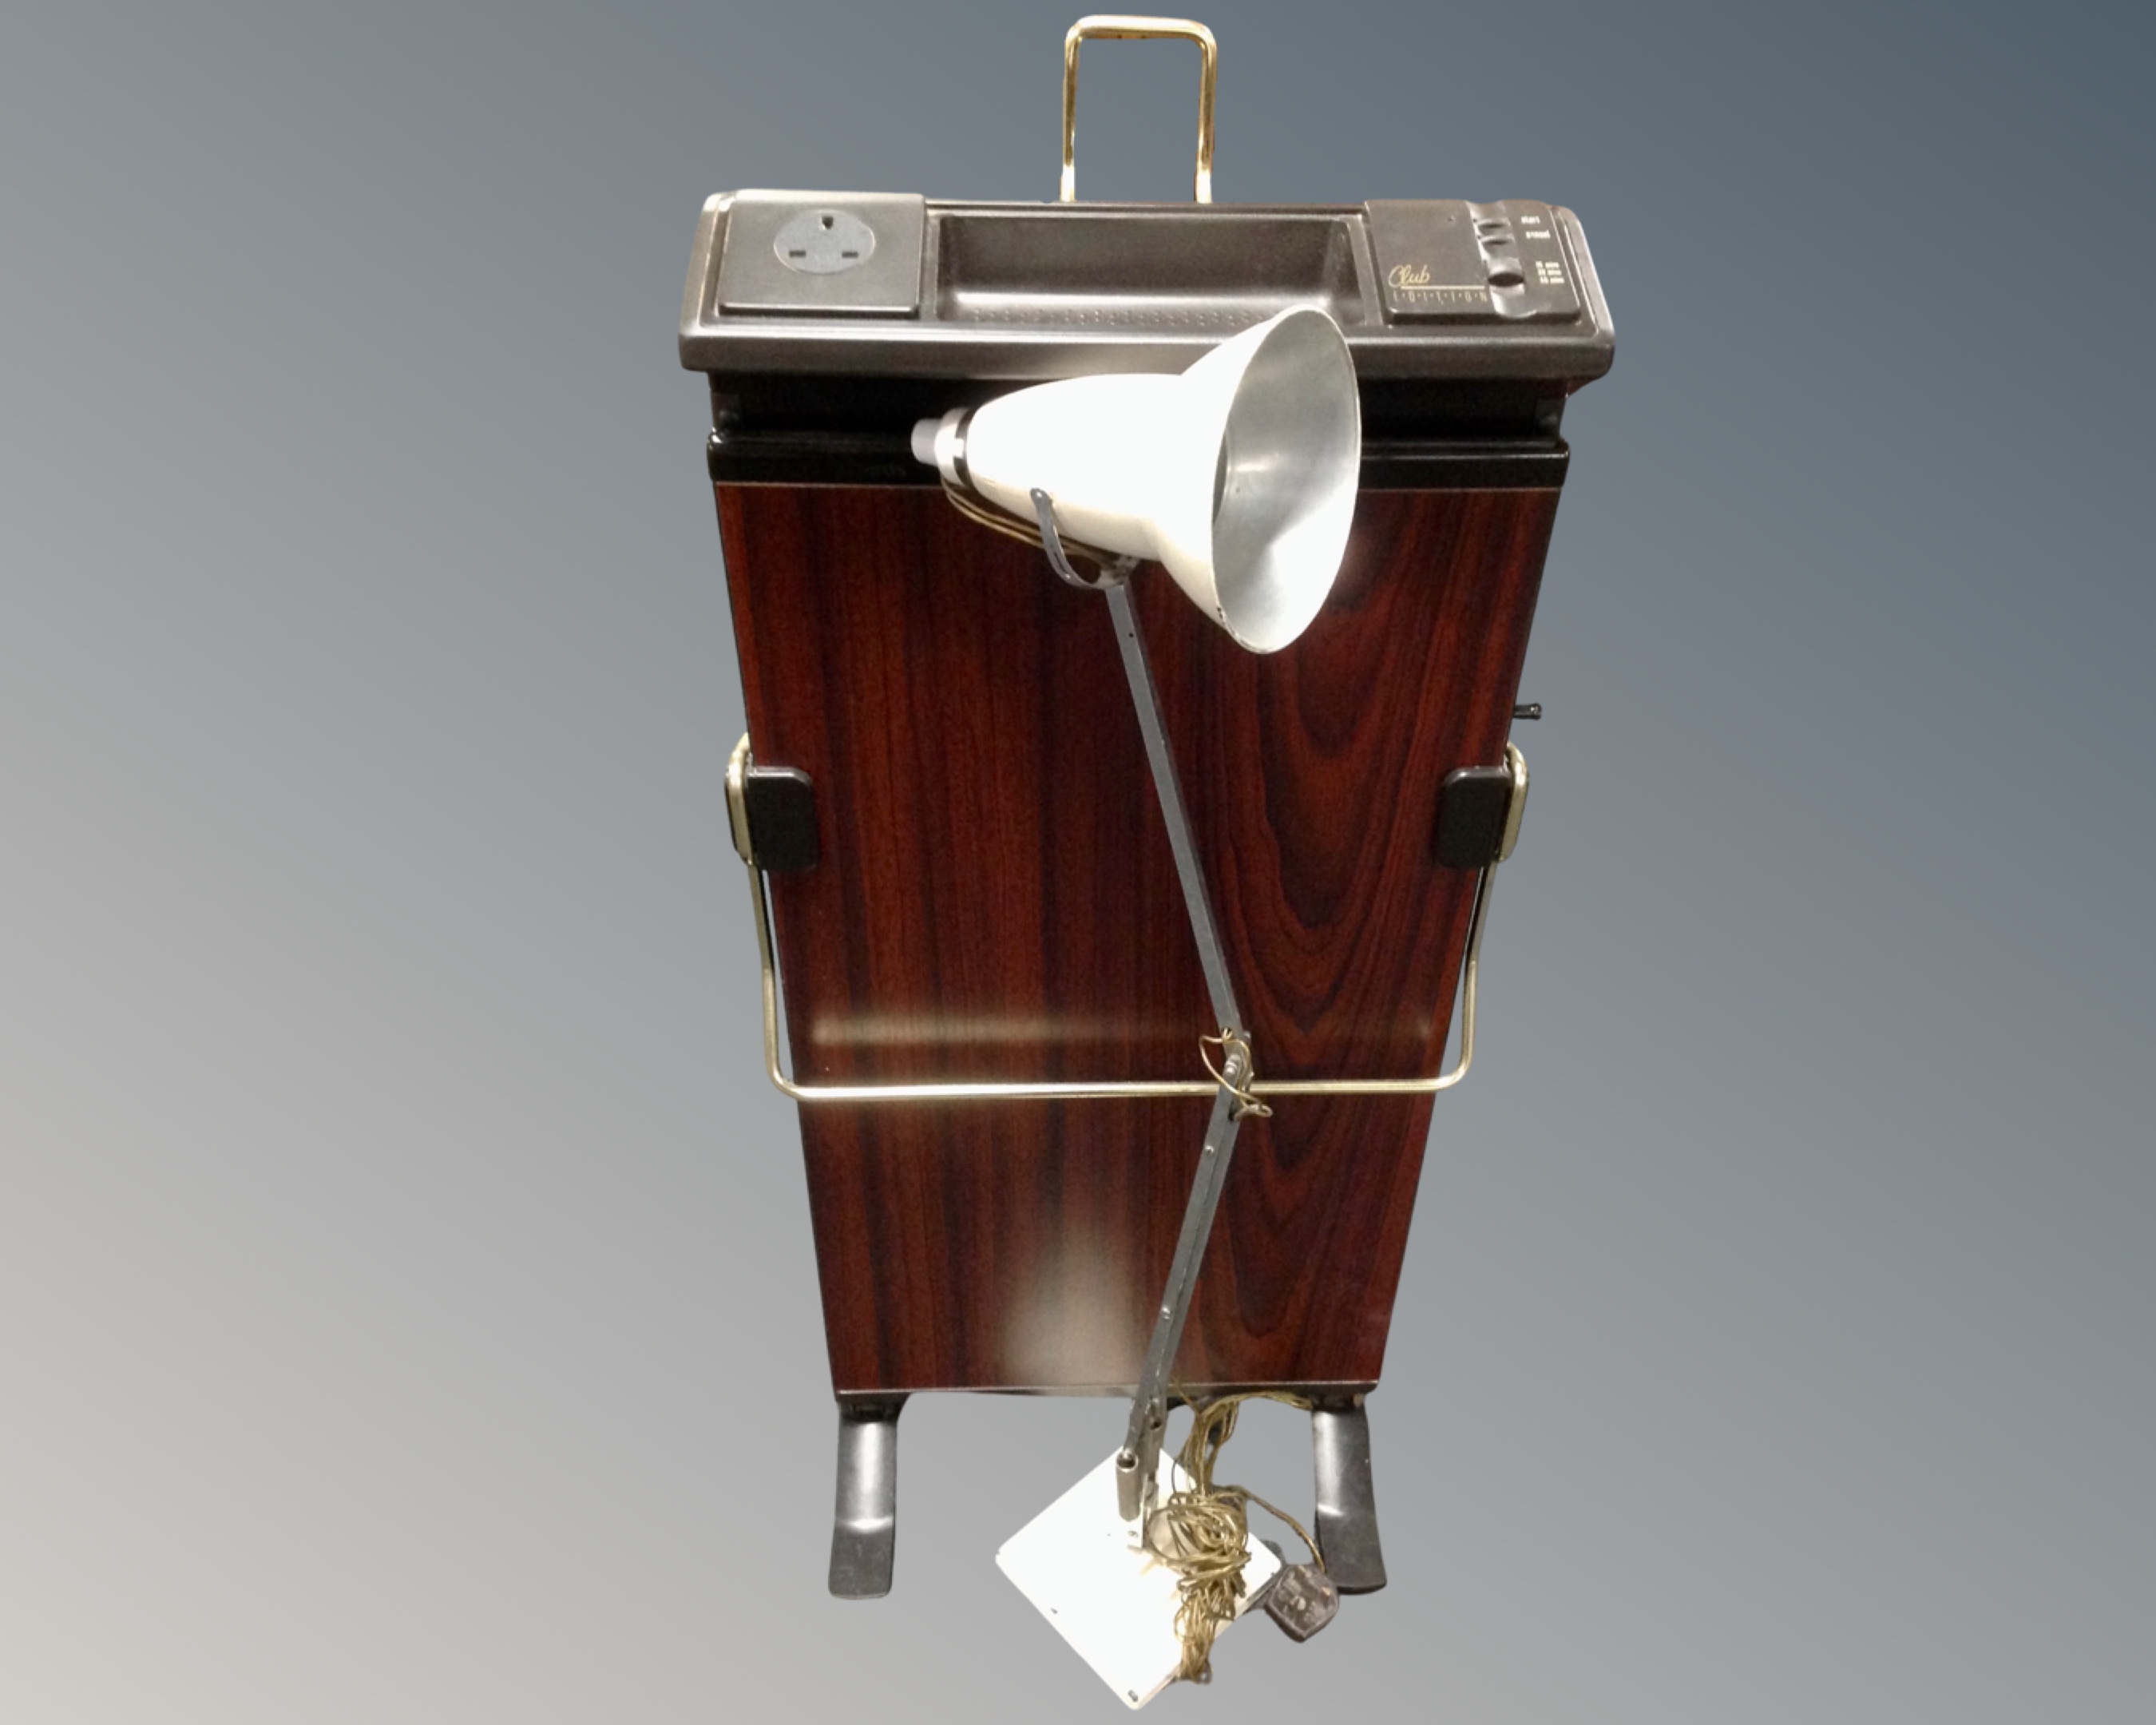 A 20th century Herbert Terry angle poise lamp together with a Corby club edition trouser press.